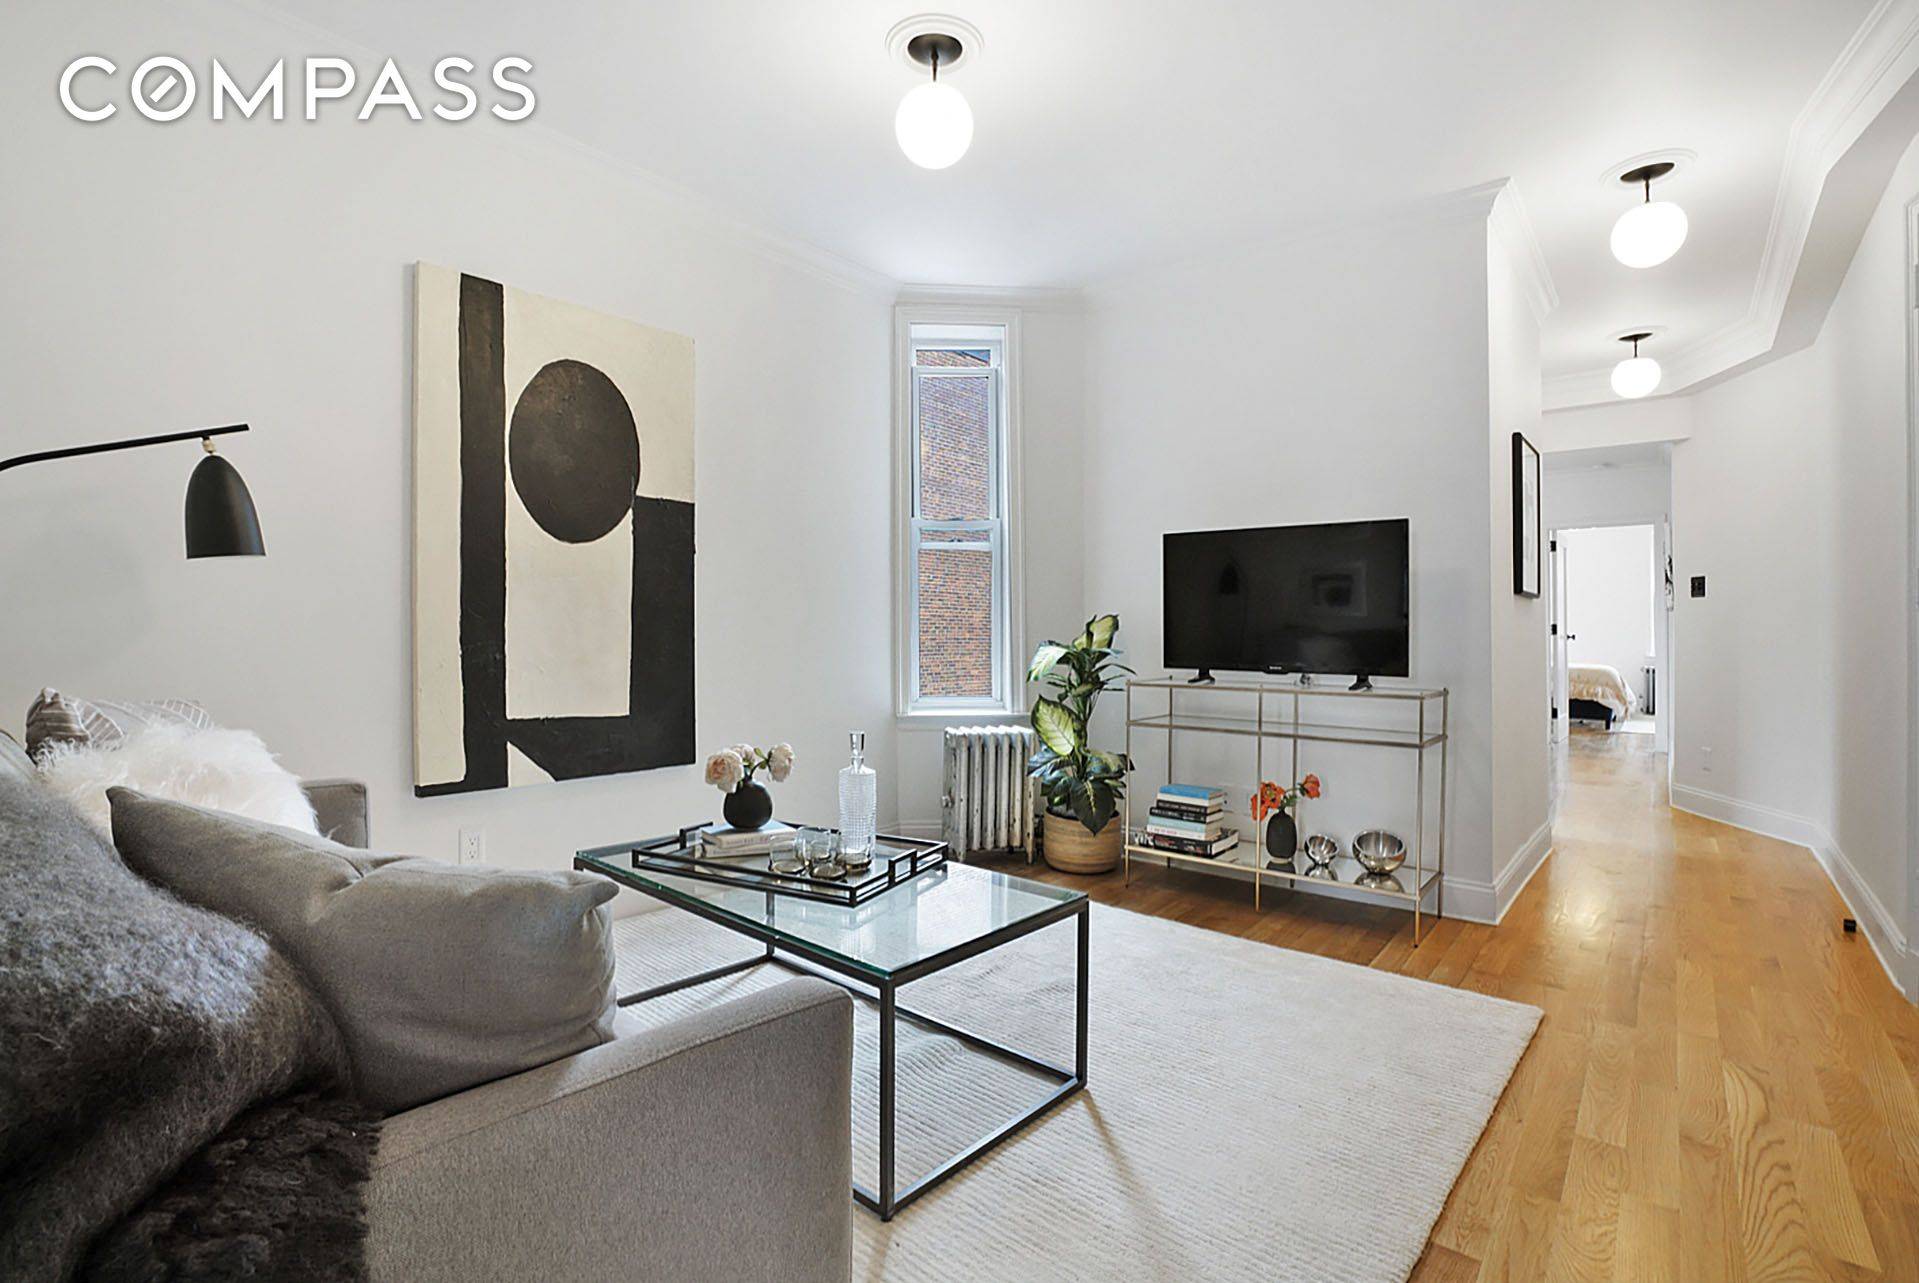 Welcome to 222 Pacific 222 Pacific is an incredible opportunity to enjoy the comforts of modern living and reside in one of the most sought after neighborhoods in Brooklyn.